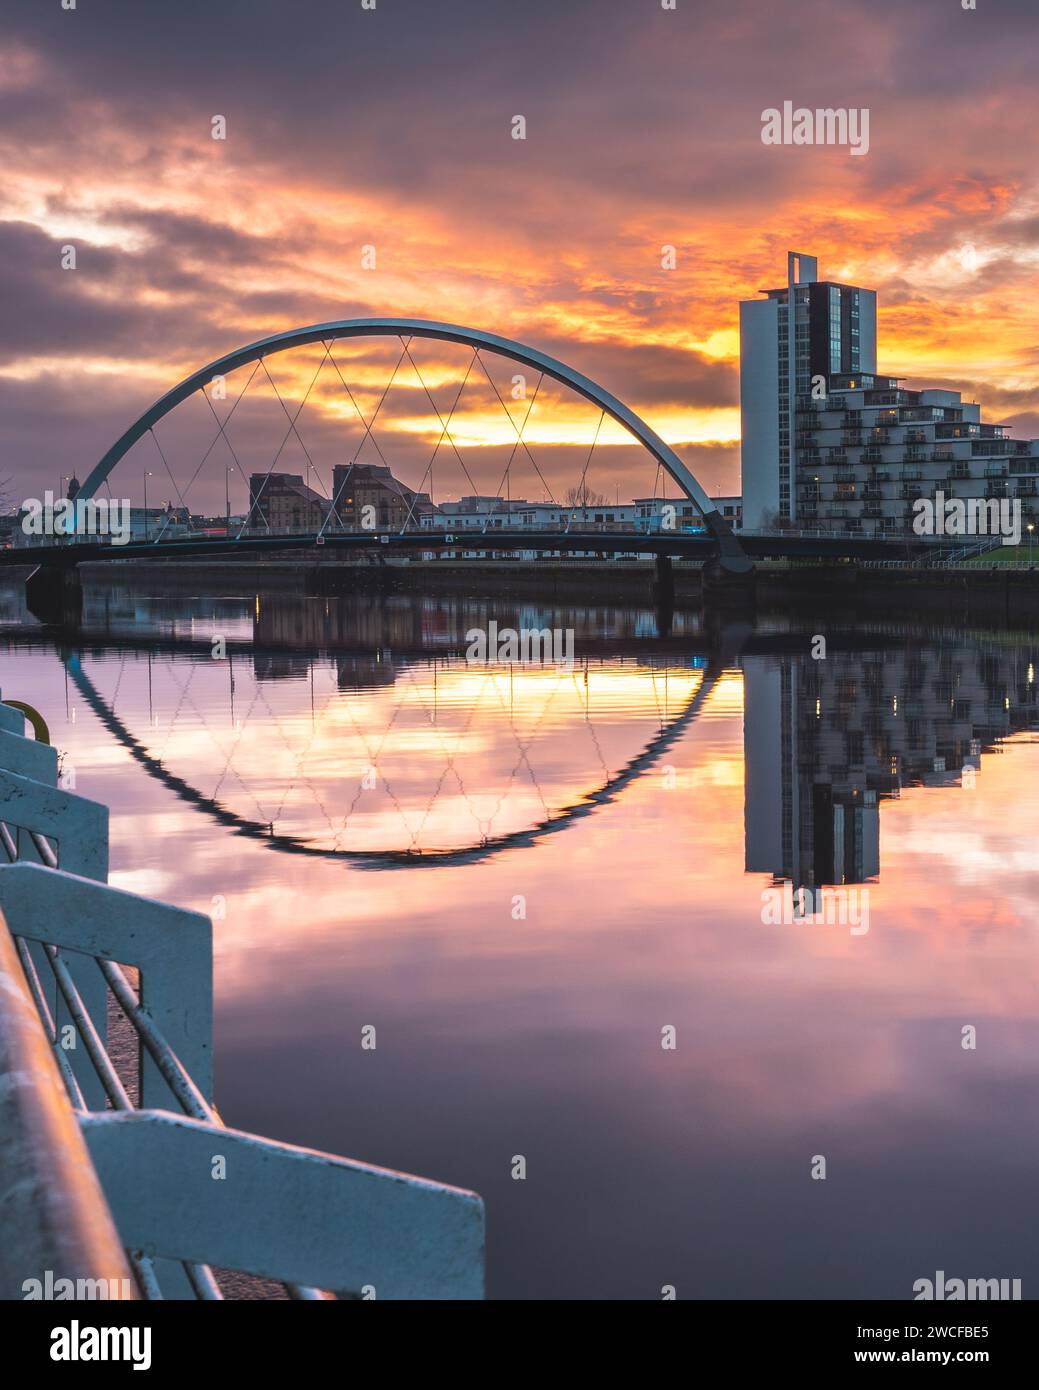 Glasgow with the Clyde Arch Bridge over the Clyde river, Scotland. Stock Photo